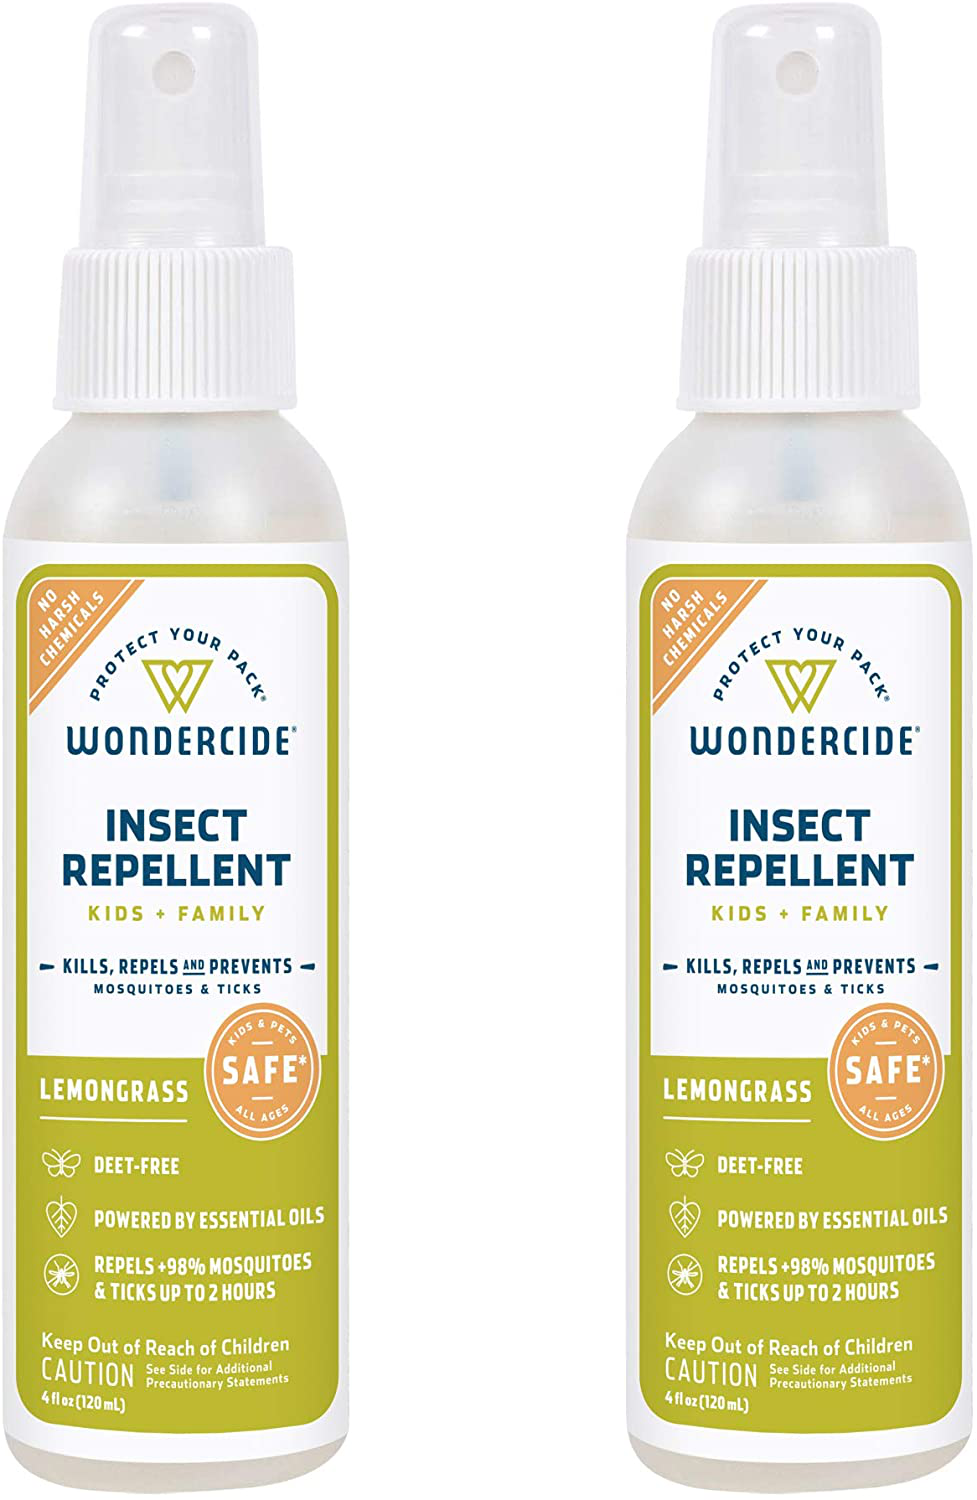 Wondercide - Mosquito, Tick, Fly, and Insect Repellent with Natural Essential Oils - DEET-Free Plant-Based Bug Spray and Killer - Safe for Kids, Babies, and Family - Lemongrass 2-Pack of 4 oz Bottle